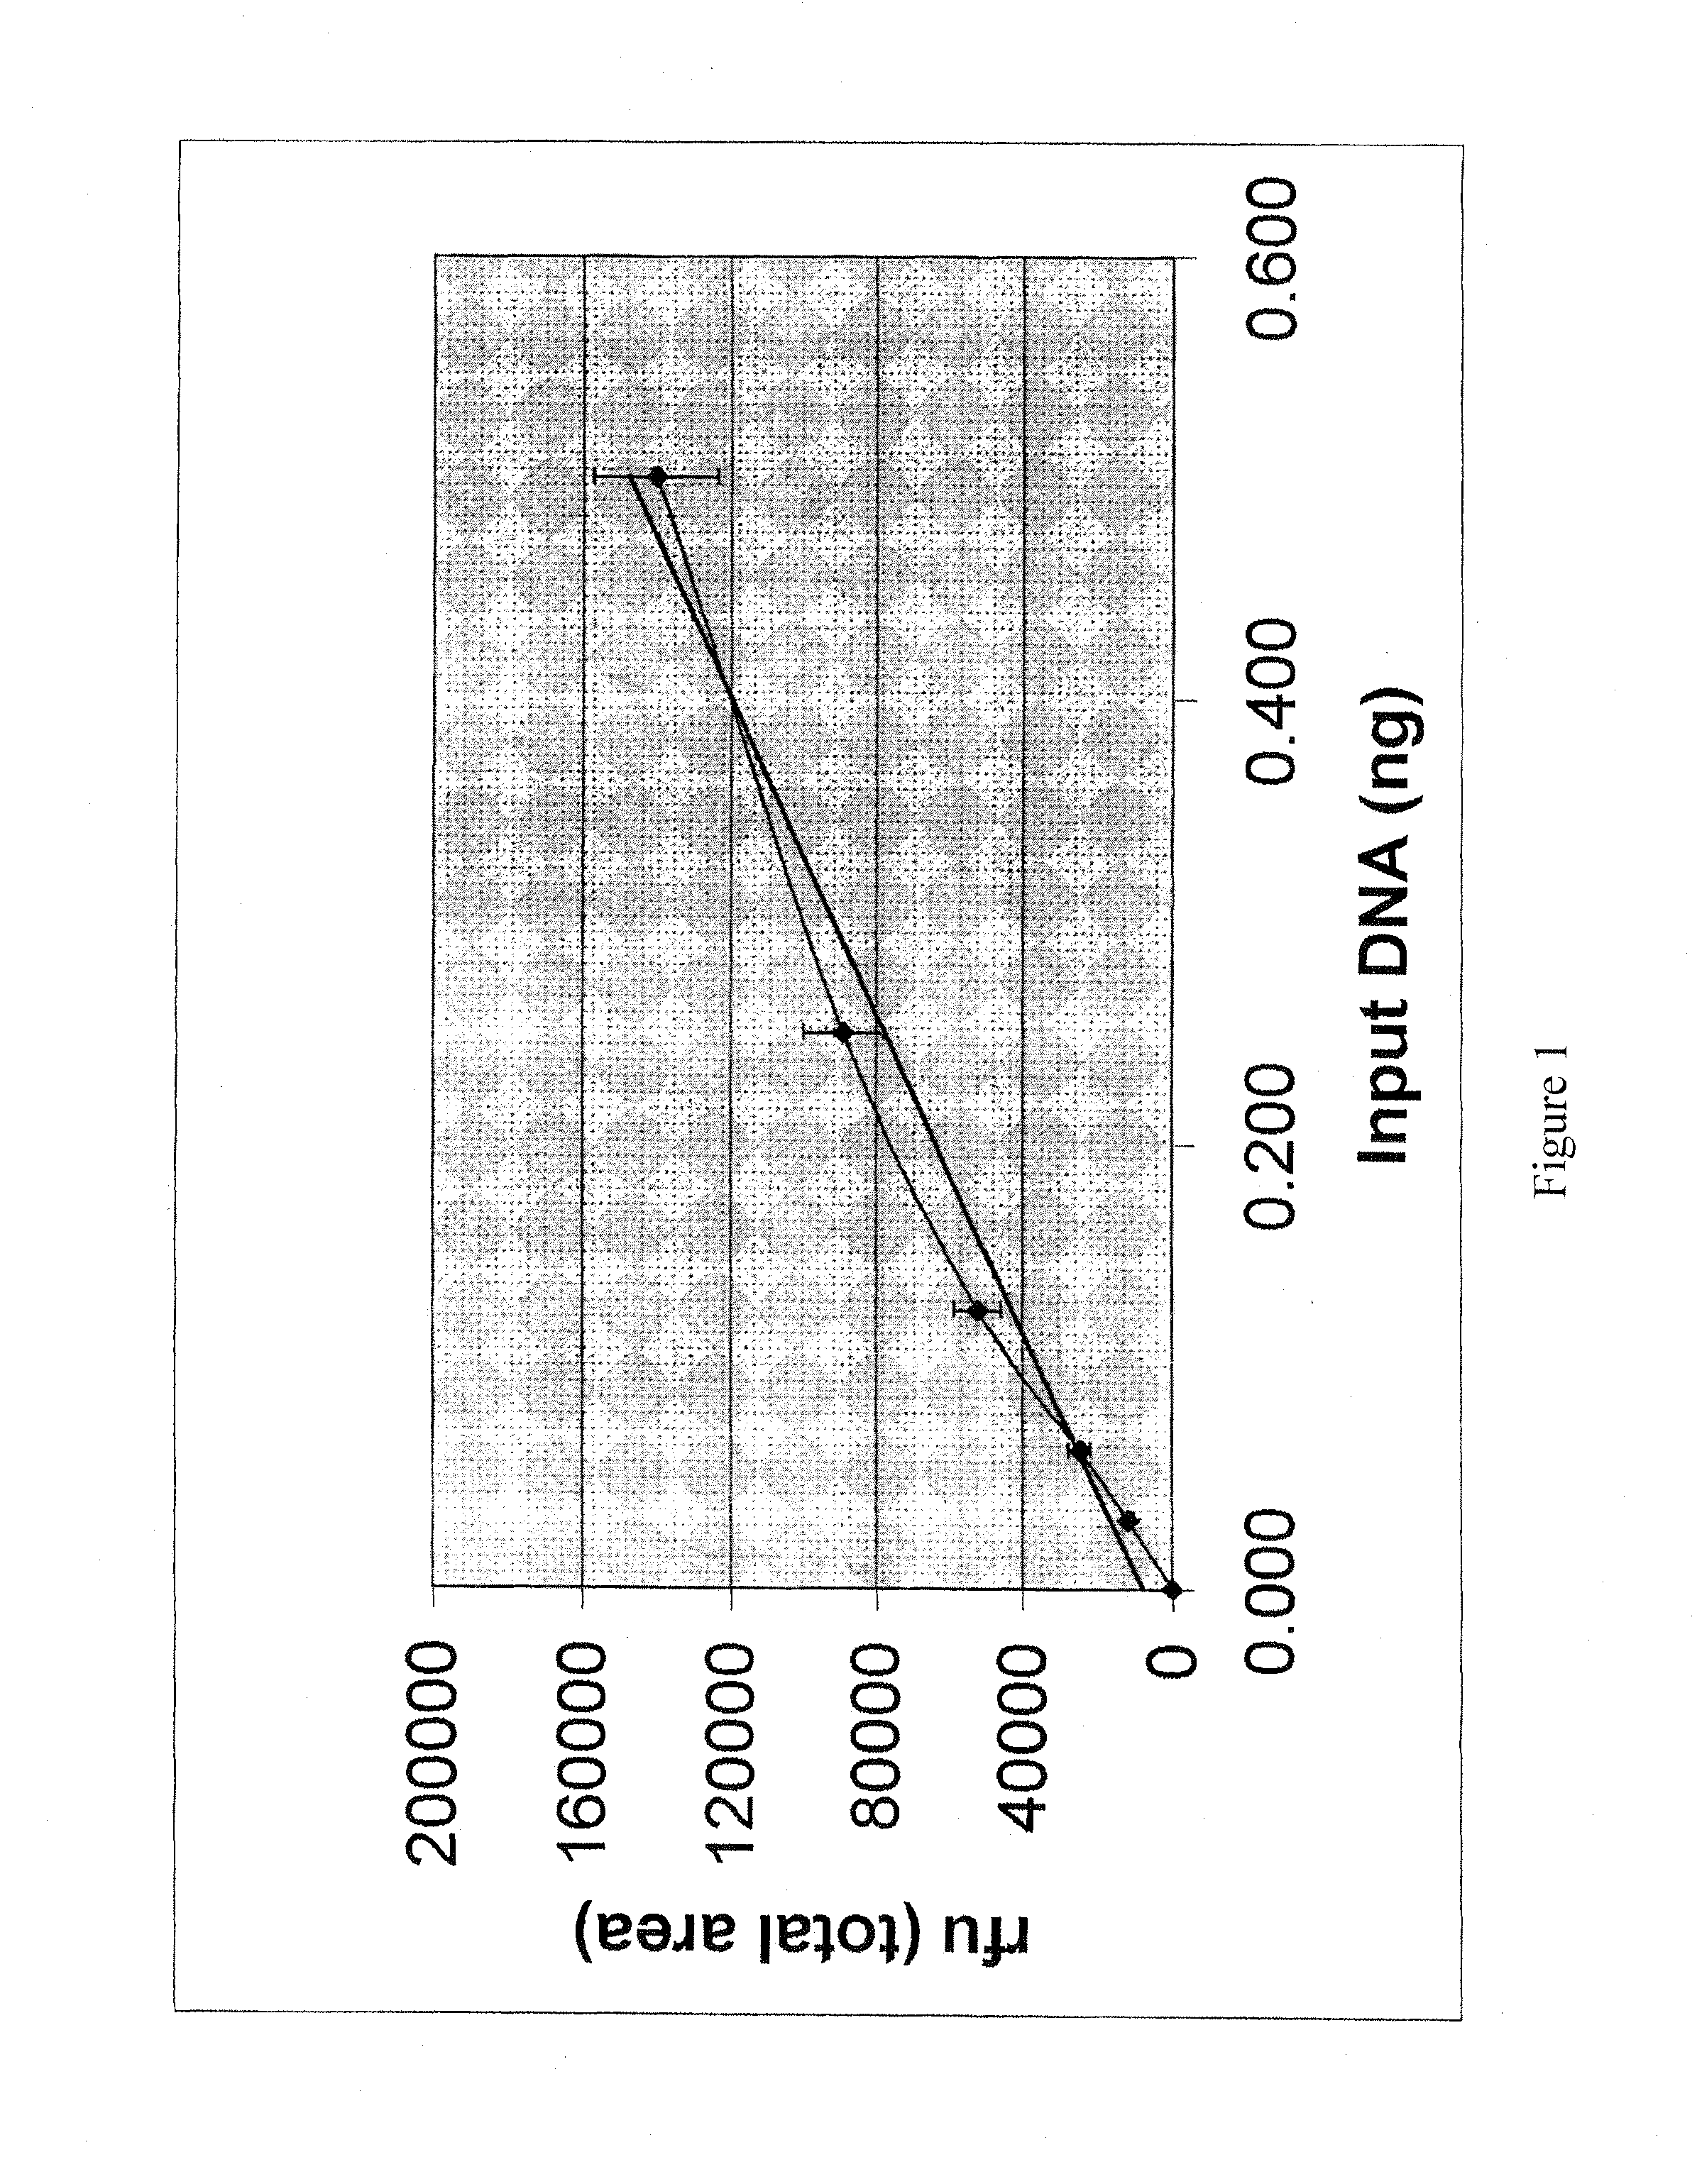 Method for simultaneously determining in a single multiplex reaction gender of donors and quantities of genomic DNA and ratios thereof, presence and extent of DNA degradation, and PCR inhibition within a human DNA sample